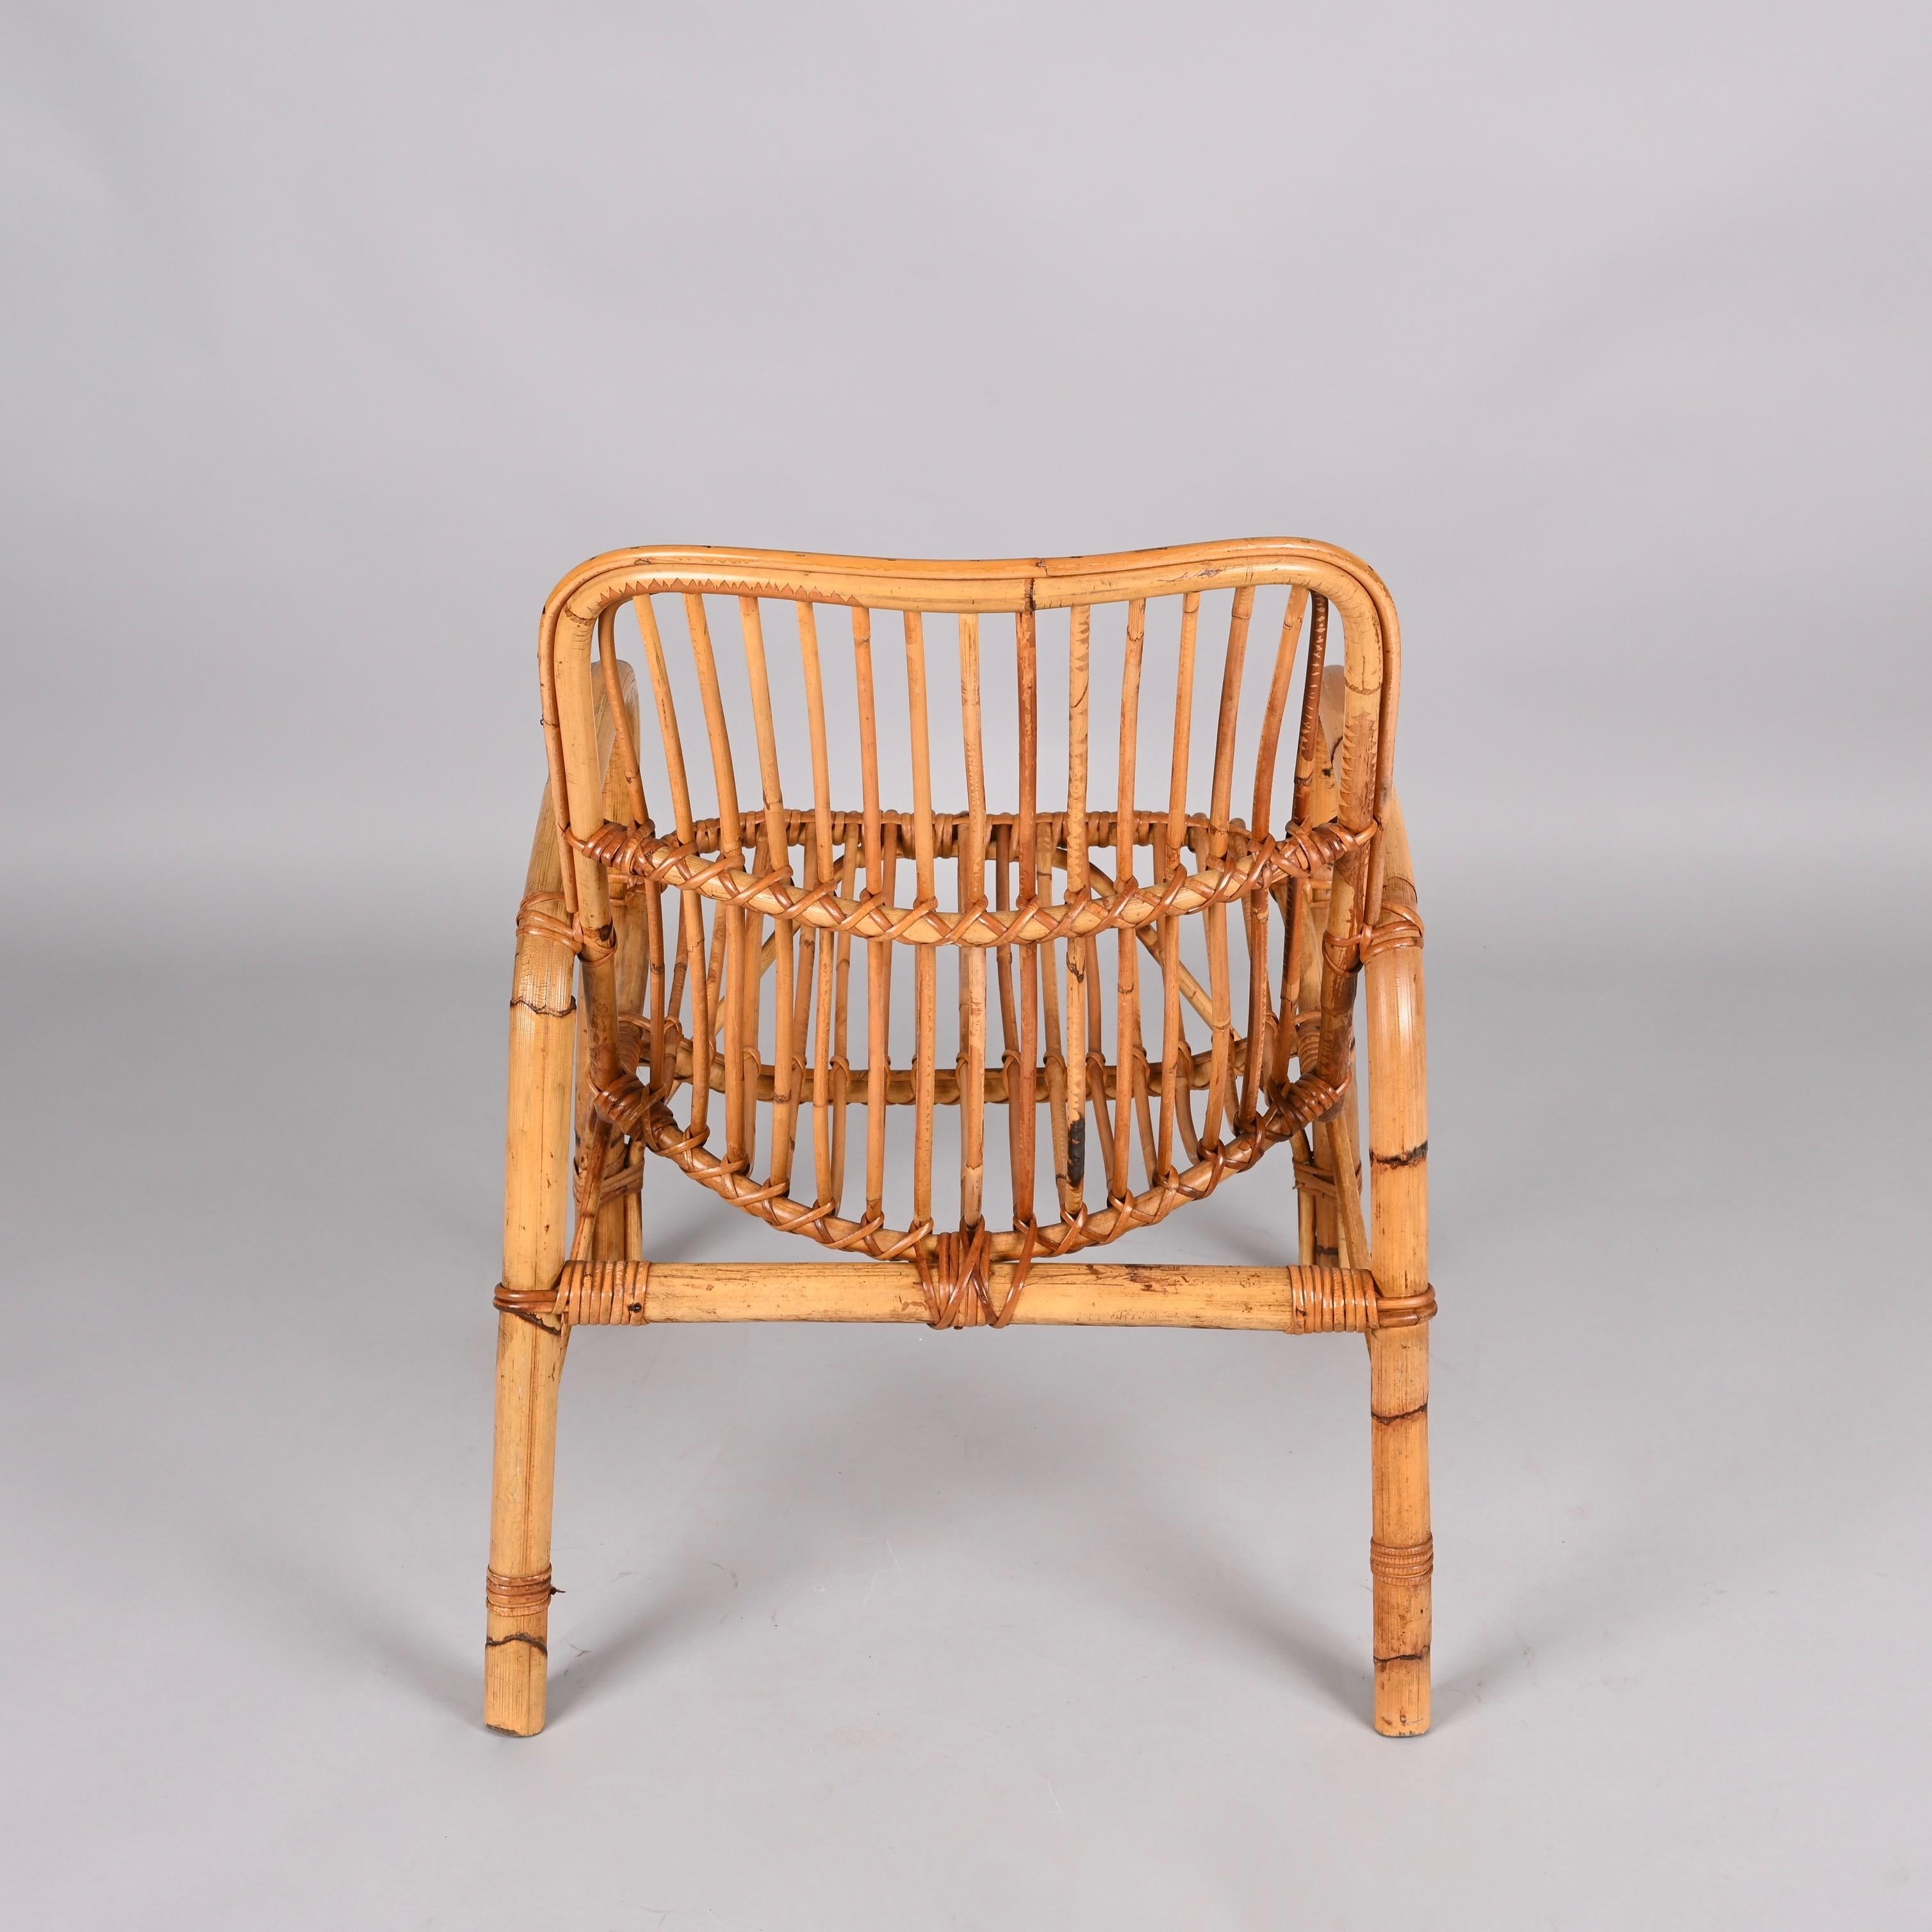 Midcentury French Riviera Rattan and Bamboo Italian Armchair, 1960s For Sale 4